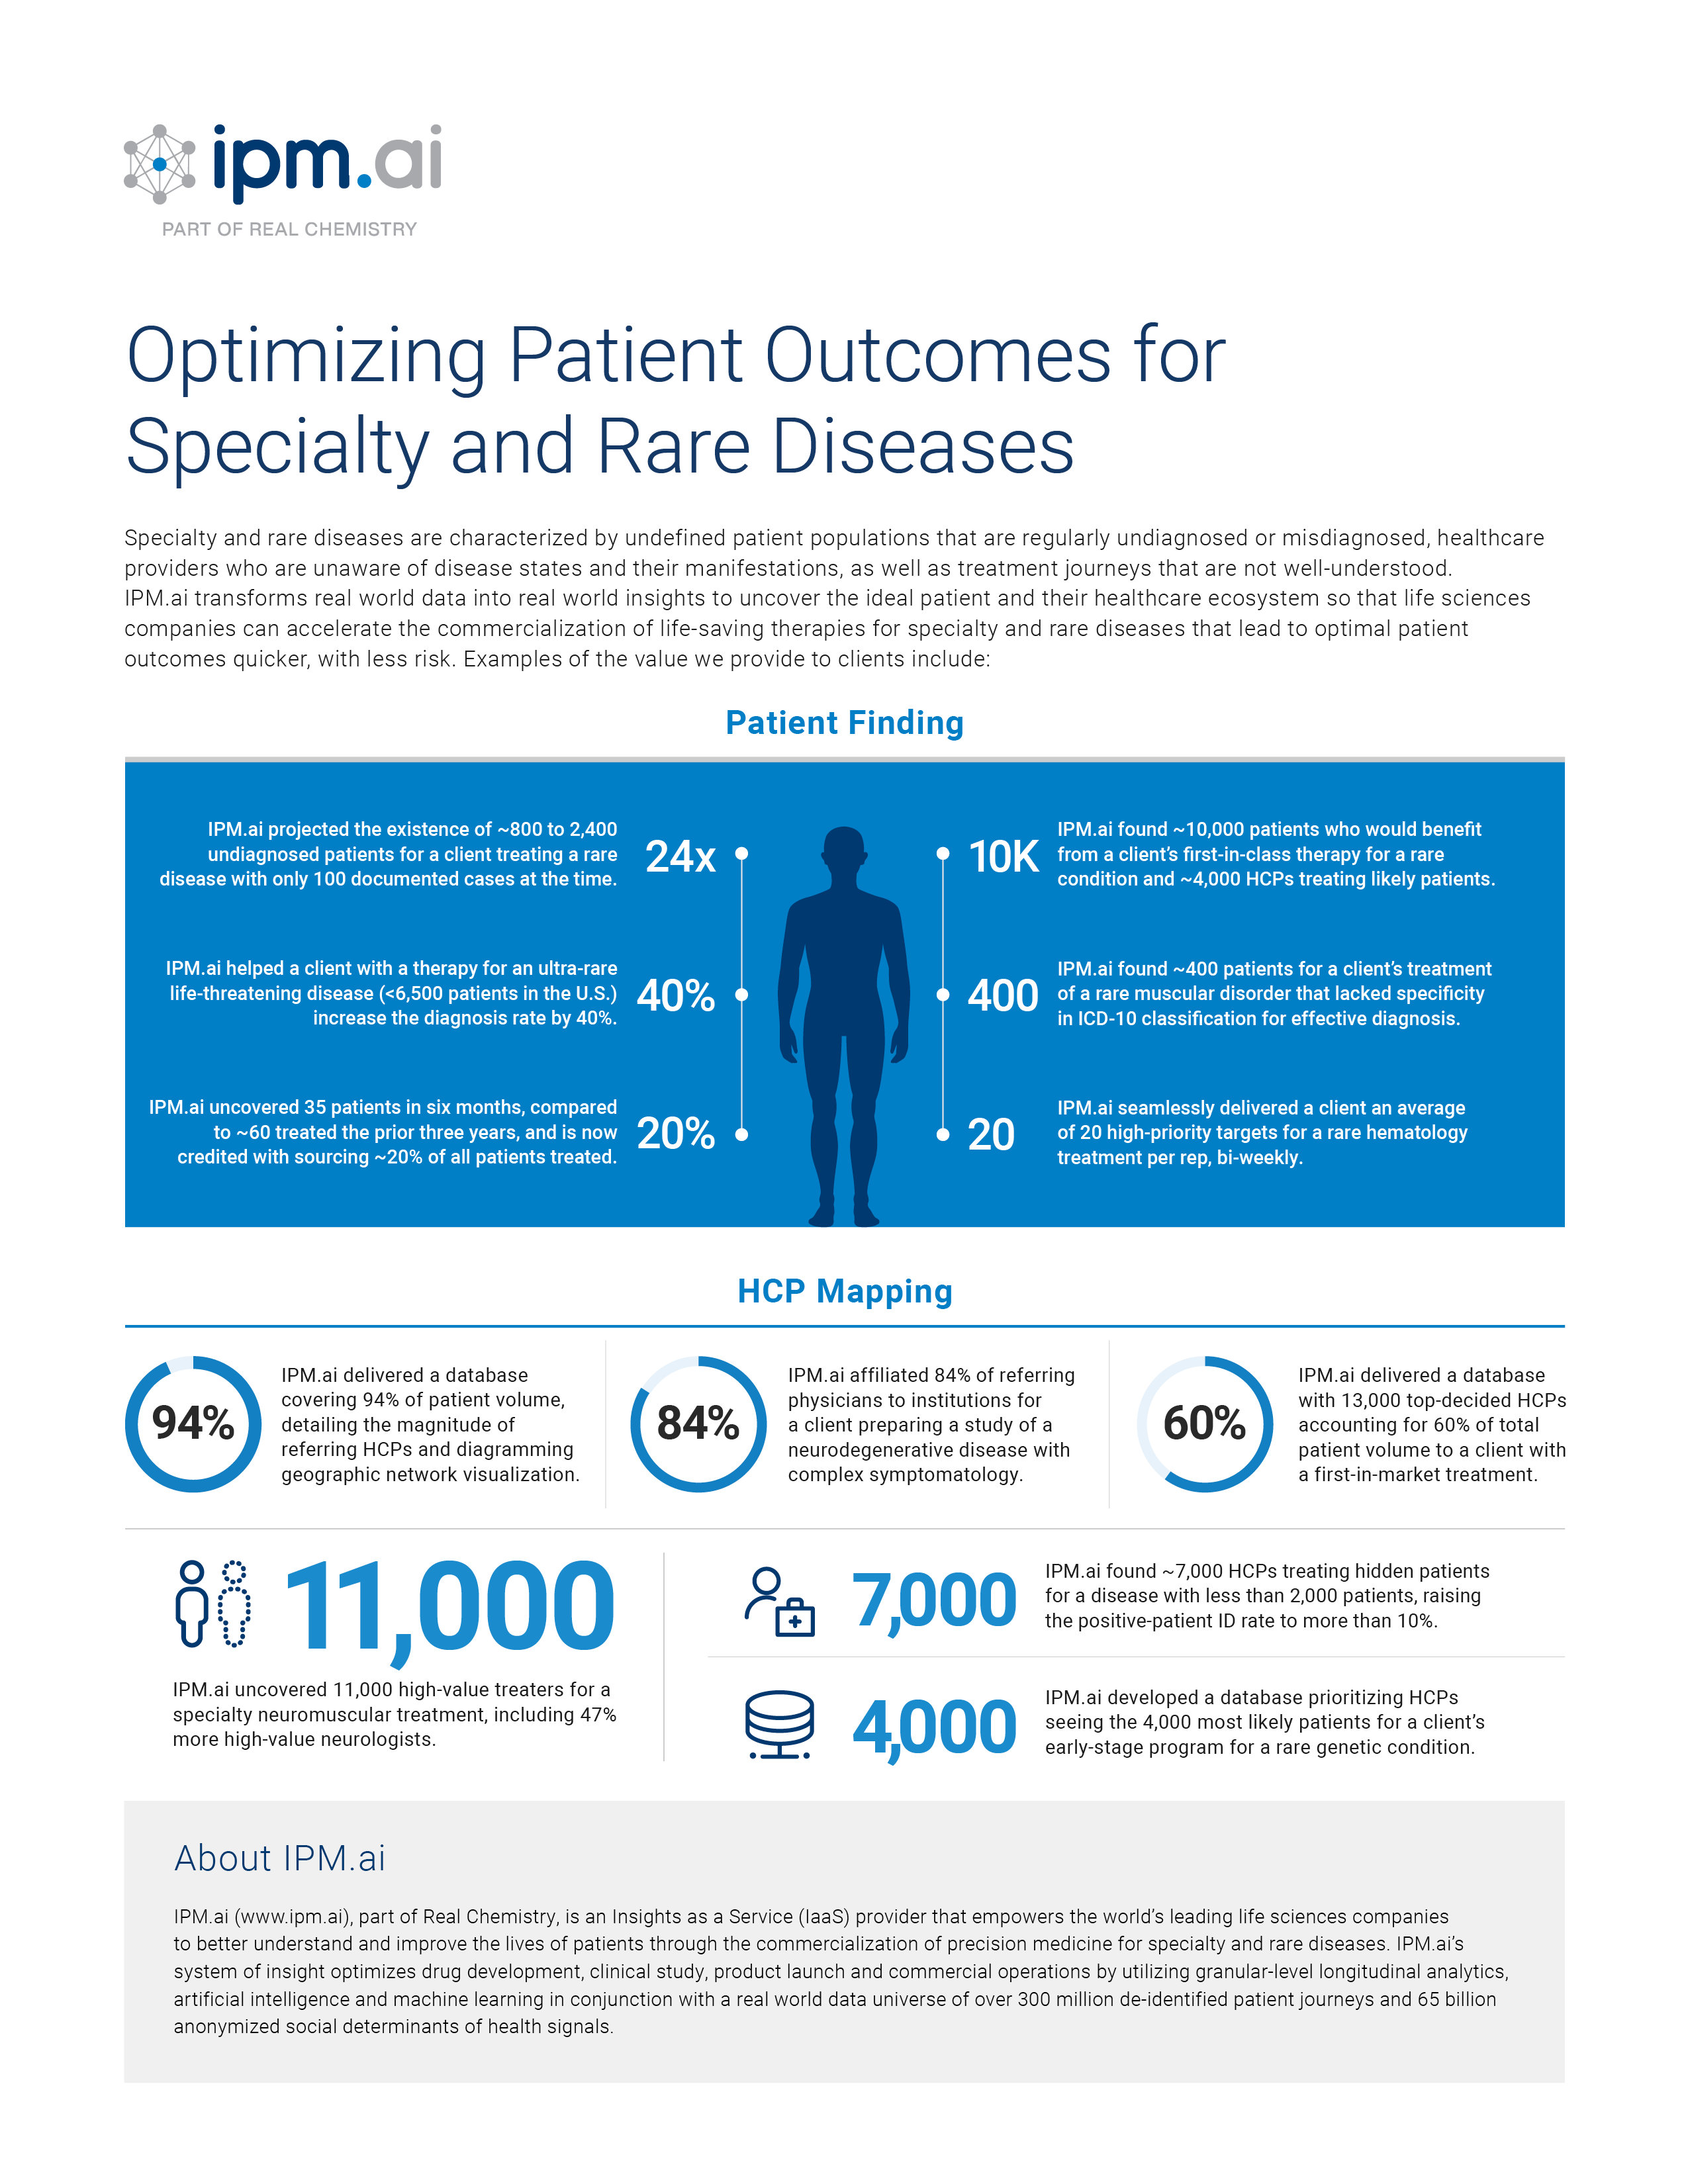 Optimizing Patient Outcomes_IPM